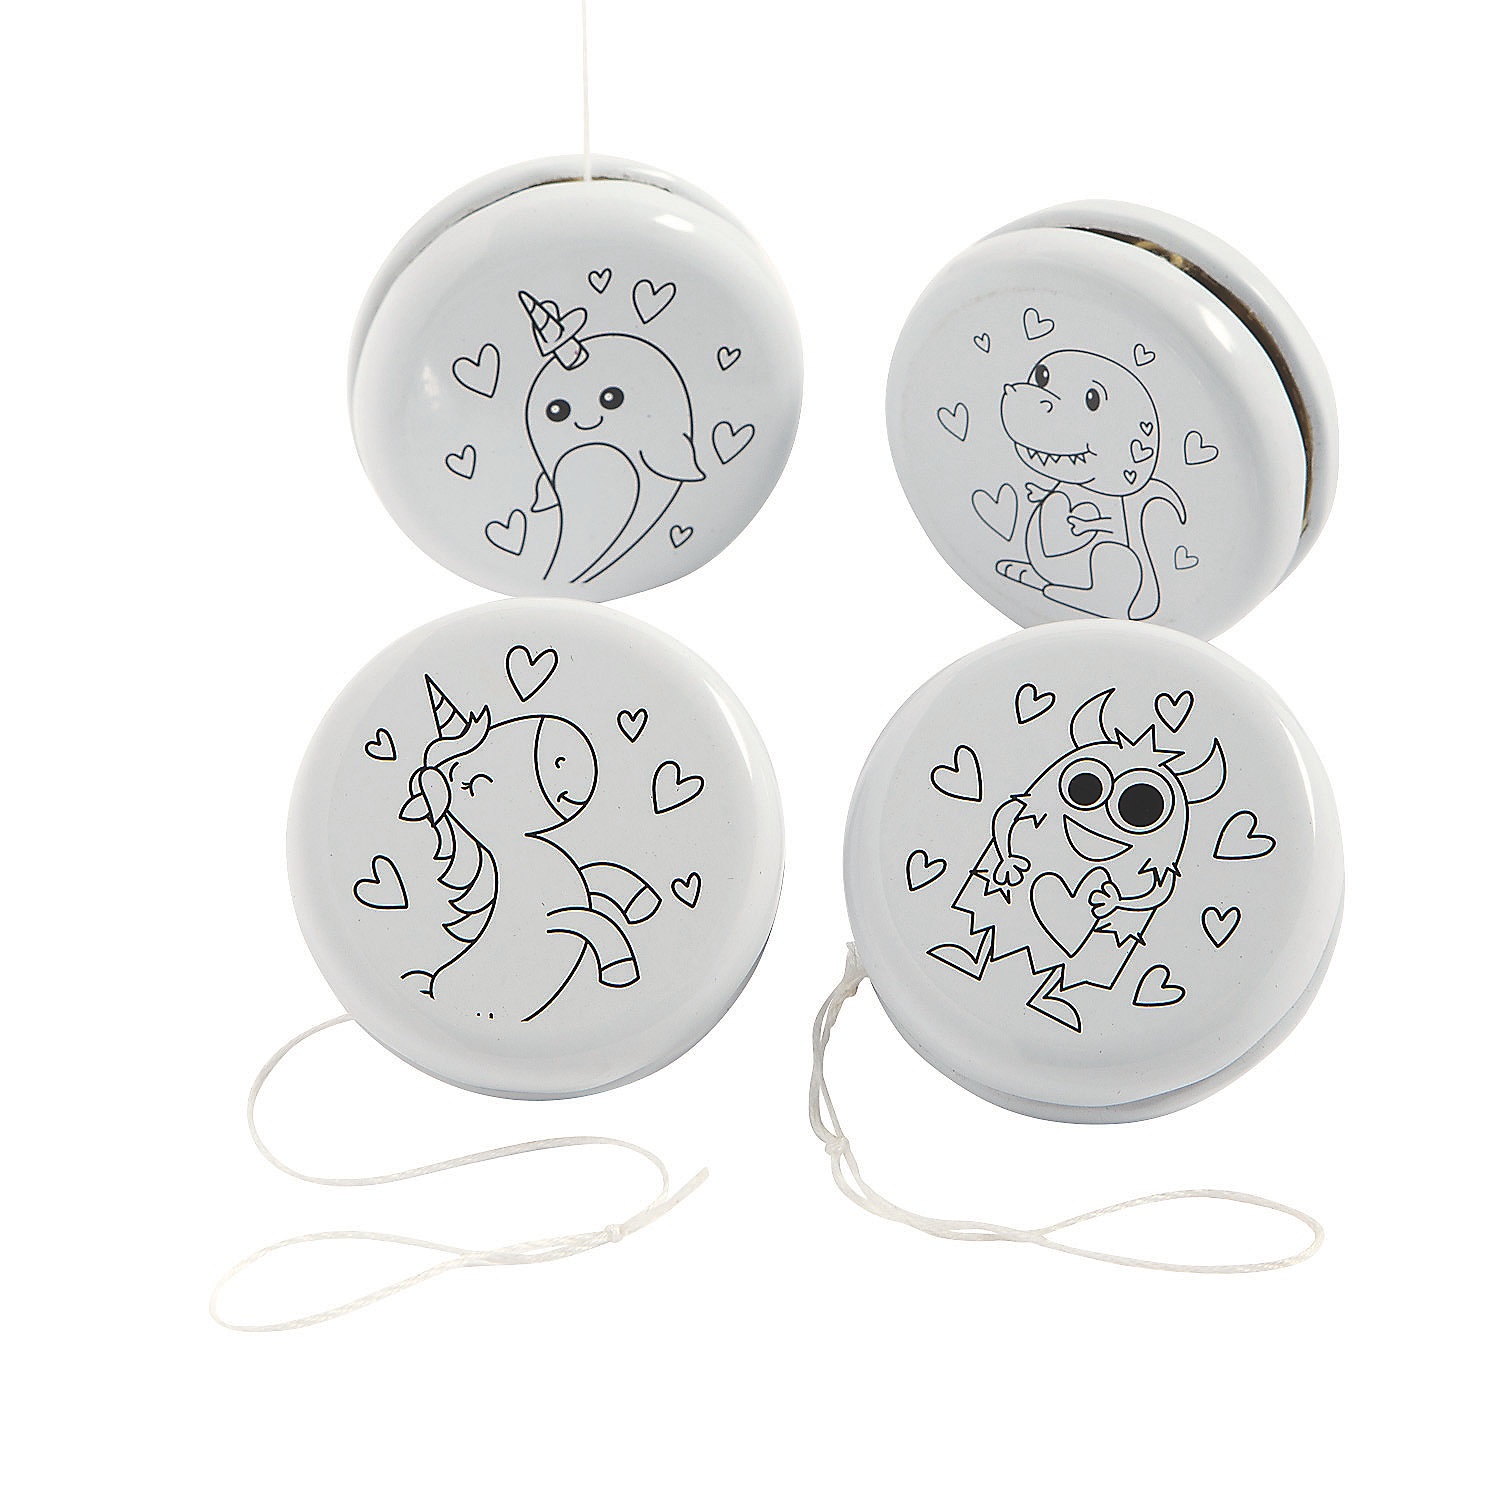 color-your-own-yoyos-valentine-exchanges-for-12_13942446